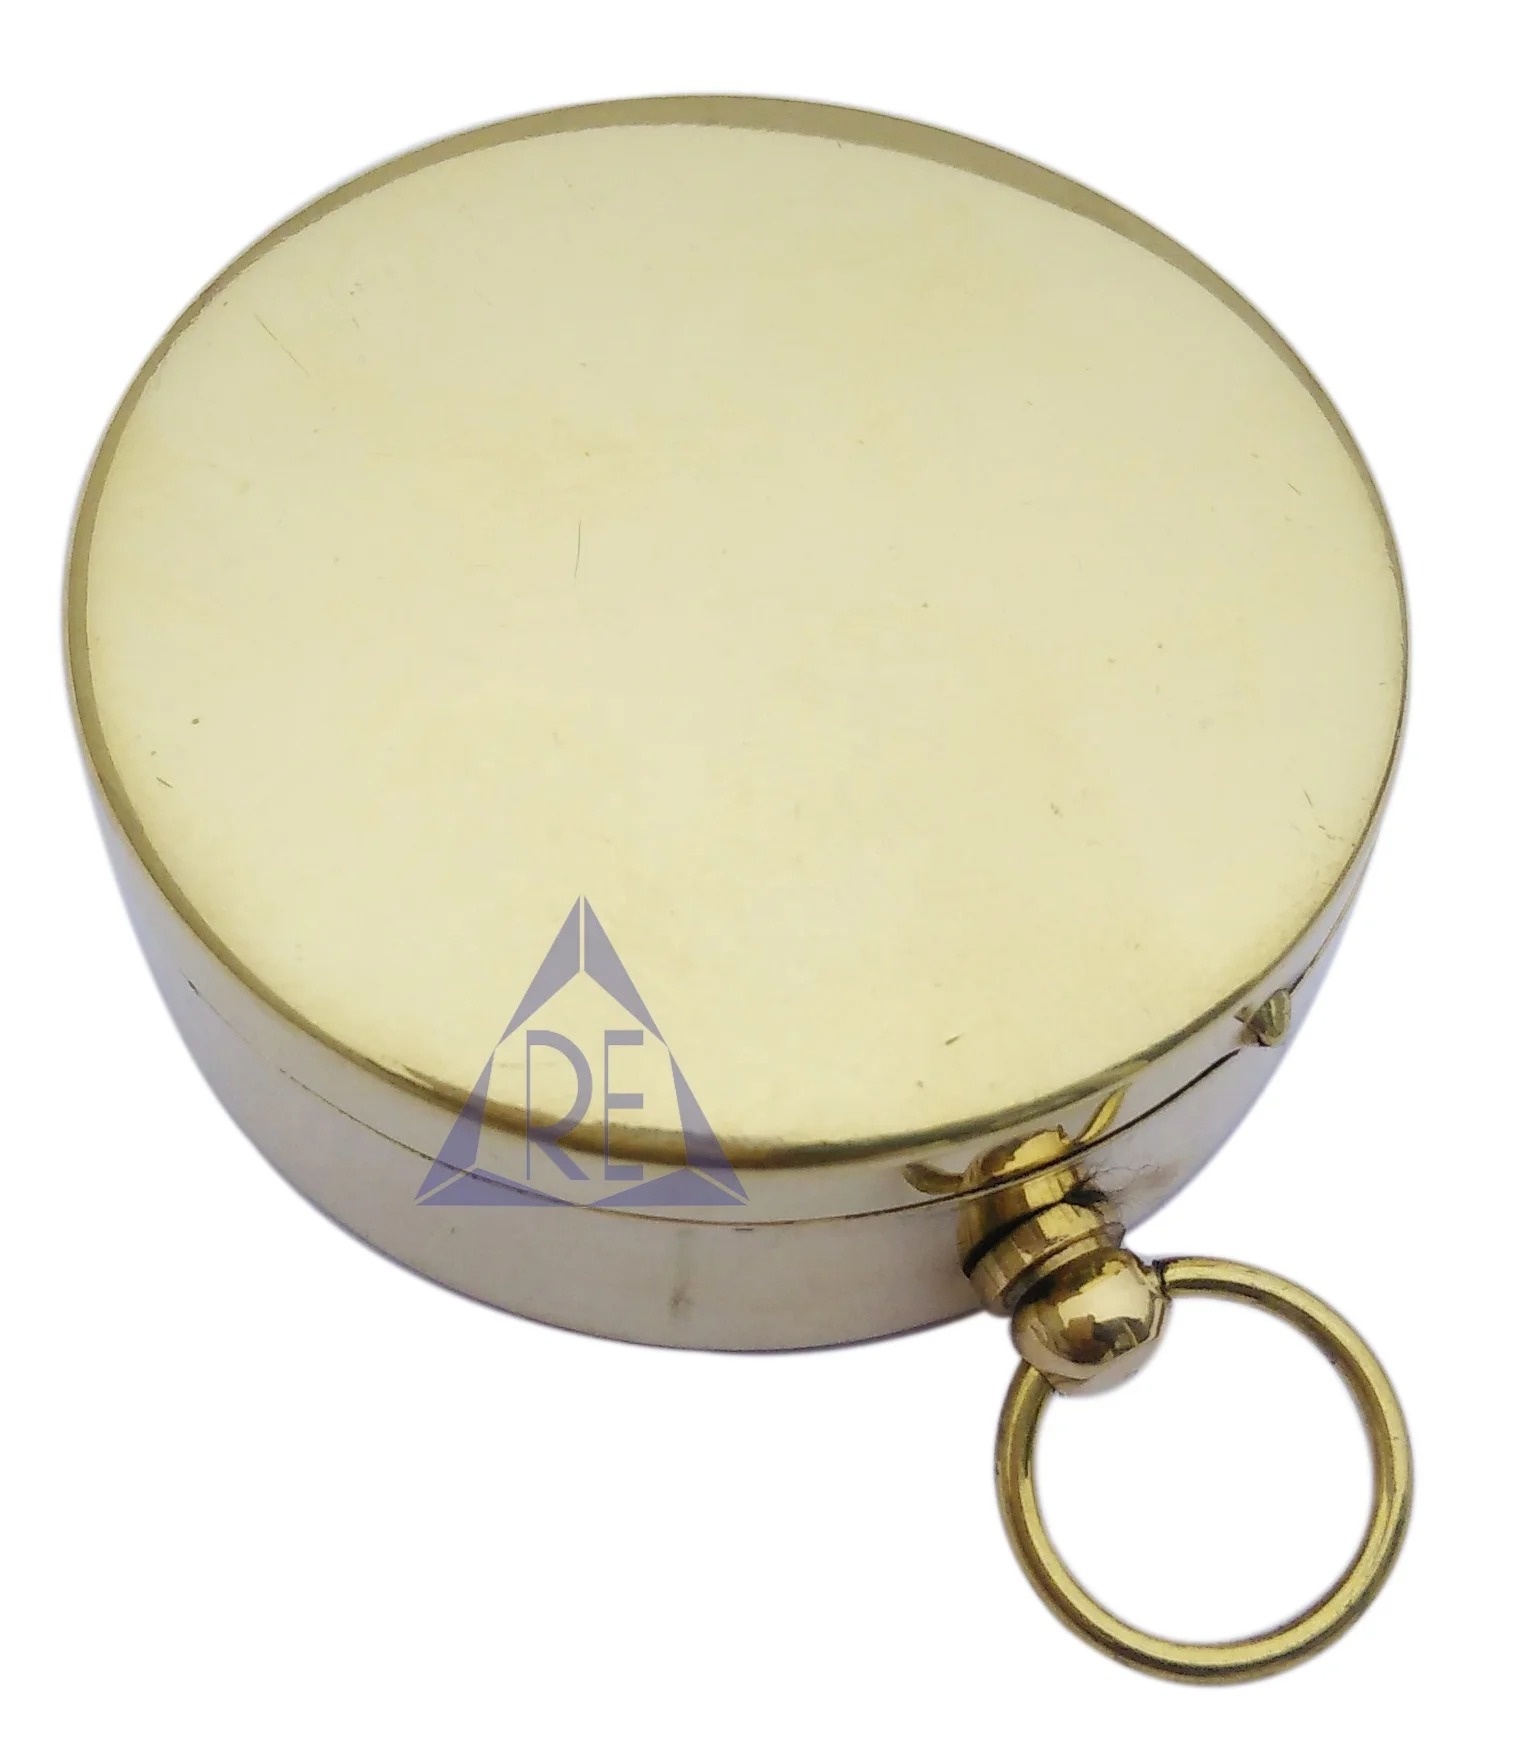 Vintage Collectible Brass Flat Compass Anniversary Gift Compass Lid Compass